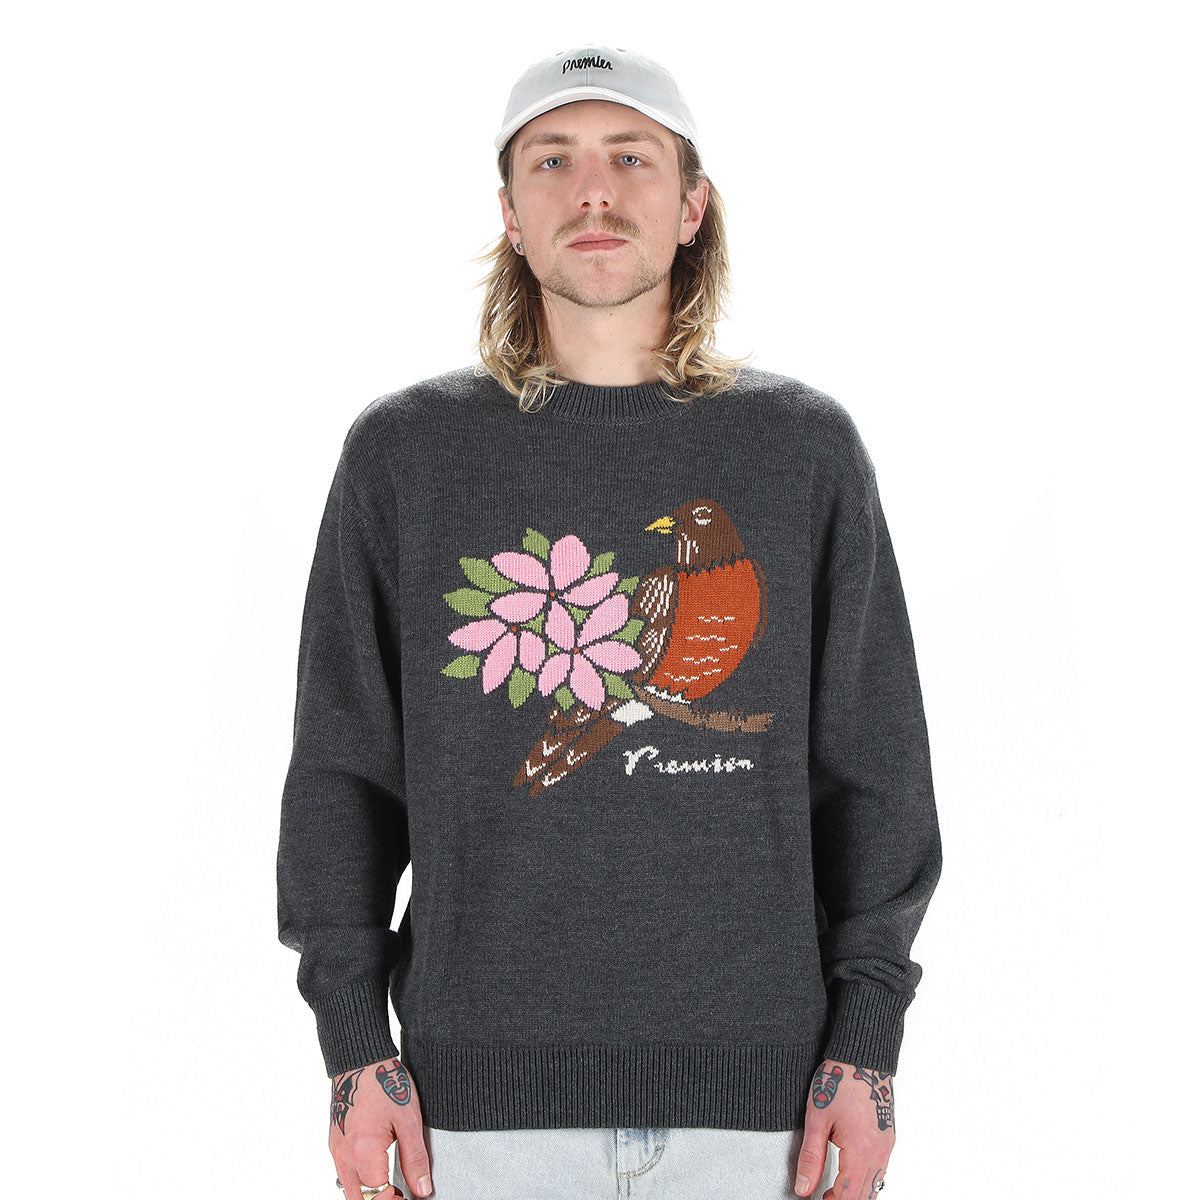 Premier State Knit Sweater Gray